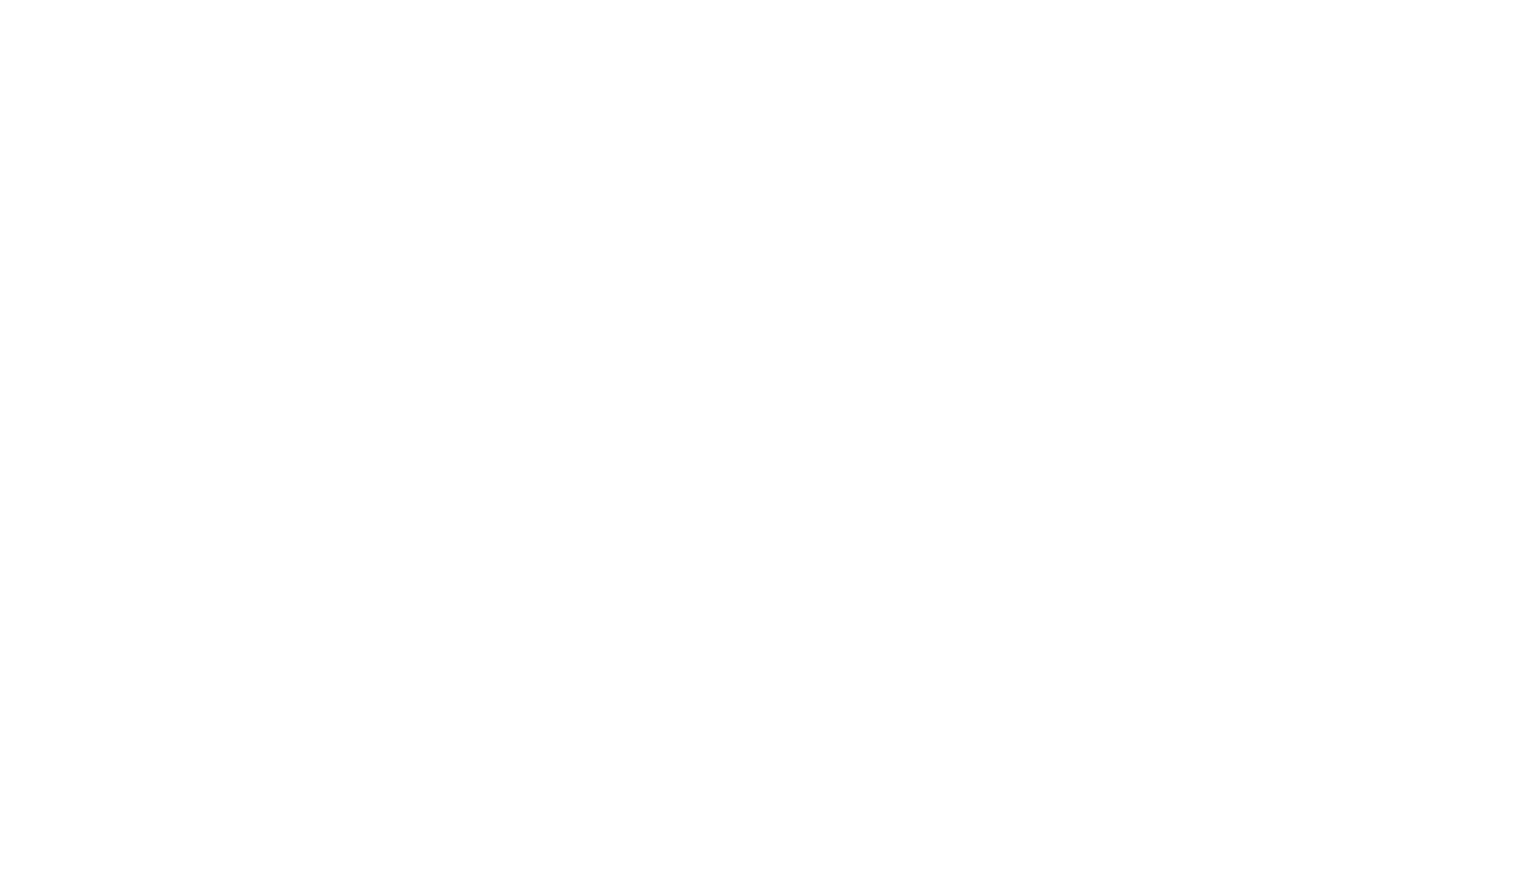 The Street Outreach Service logo in white